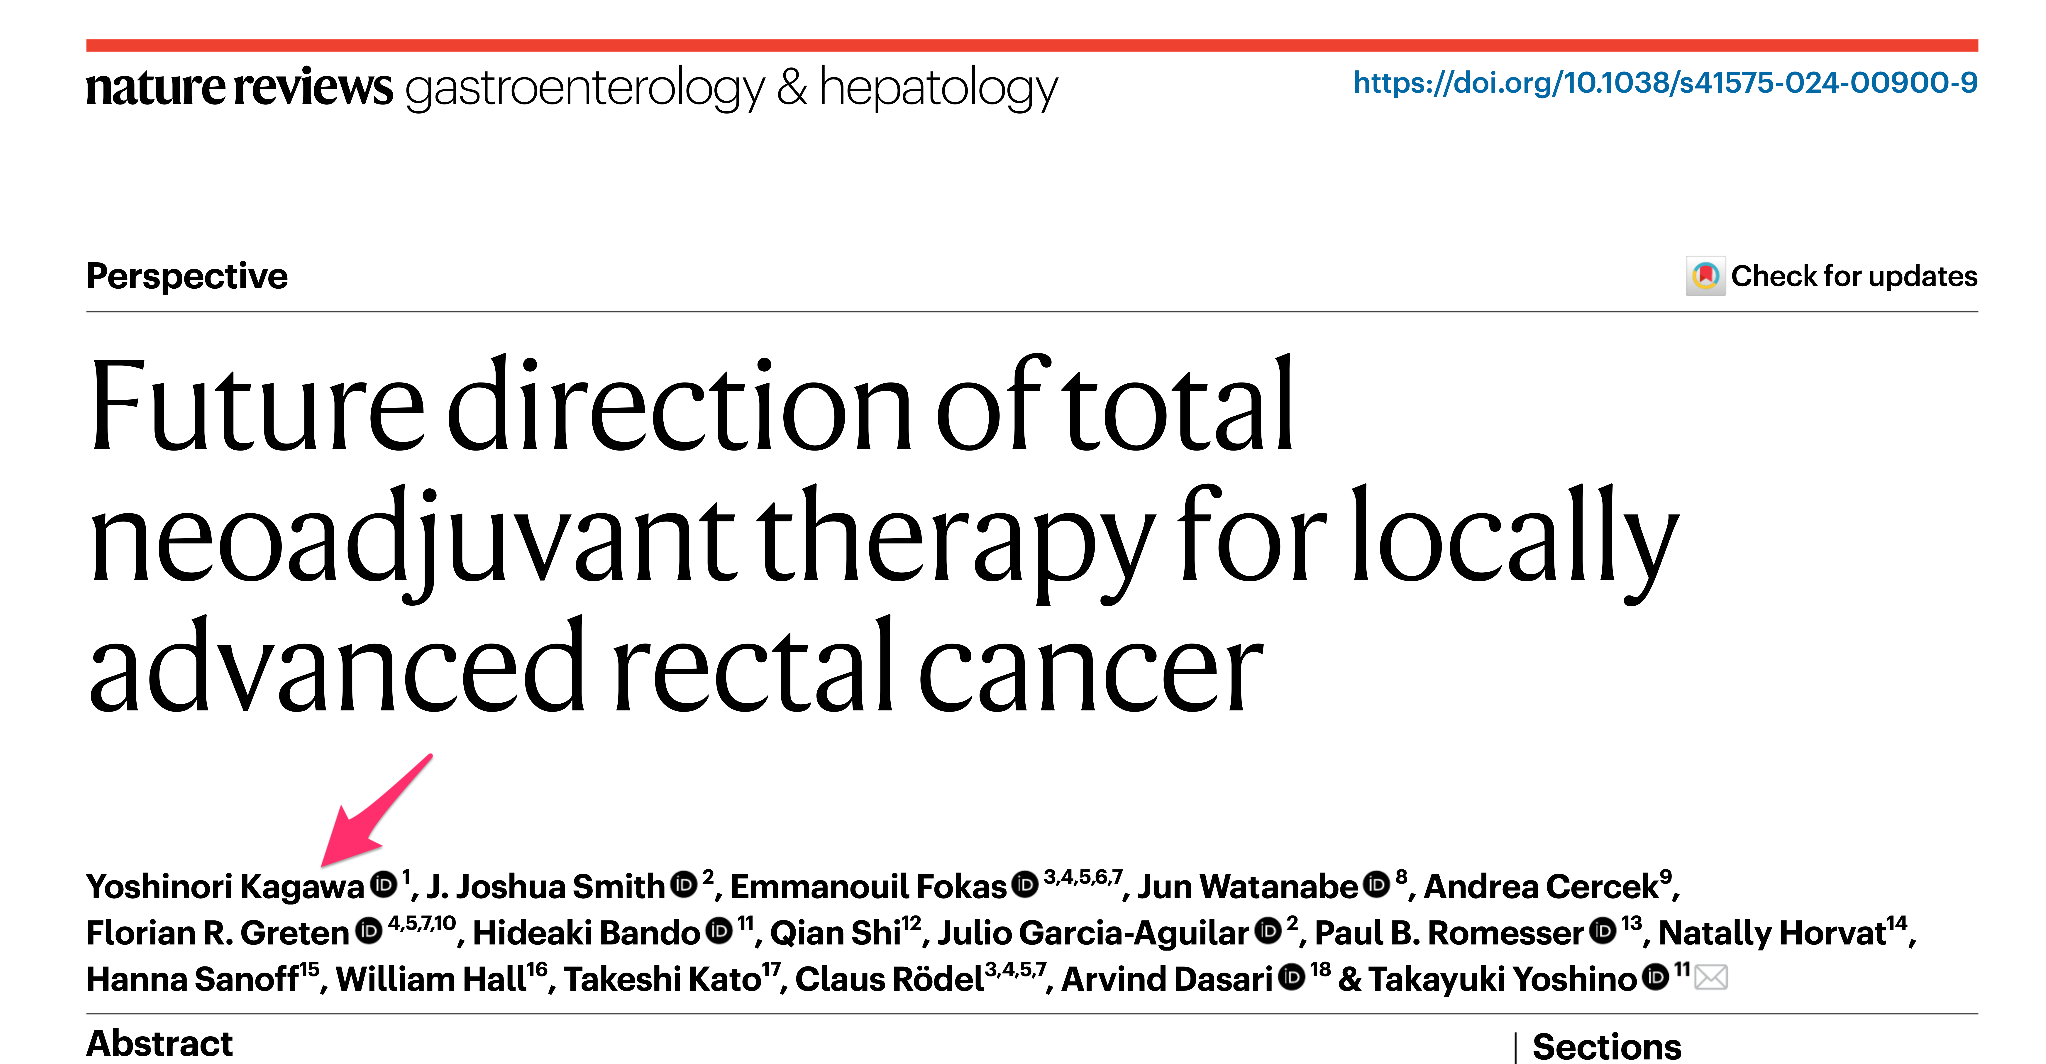 Despite therapeutic advancements, disease-free survival and overall survival of patients with locally advanced rectal cancer have not improved in most trials as a result of distant metastases. For treatment decision-making, both long-term oncologic outcomes and impact on quality-of-life indices should be considered (for example,bowel function). Total neoadjuvant therapy (TNT), comprised of chemotherapy and radiotherapy or chemoradiotherapy, is now a standard treatment approach in patients with features of high-risk disease to prevent local recurrence and distant metastases. In selected patients who have a clinical complete response, subsequent surgery might be avoided through non-operative management, but patients who do not respond to TNT have a poor prognosis. Refined molecular characterization might help to predict which patients would benefit from TNT and non-operative management. Specifically, integrated analysis of spatiotemporal multi-omics using artificial intelligence and machine learning is promising. Three prospective trials of TNT and non-operative management in Japan, the USA and Germany are collaborating to better understand drivers of response to TNT. Here, we address the future direction for TNT